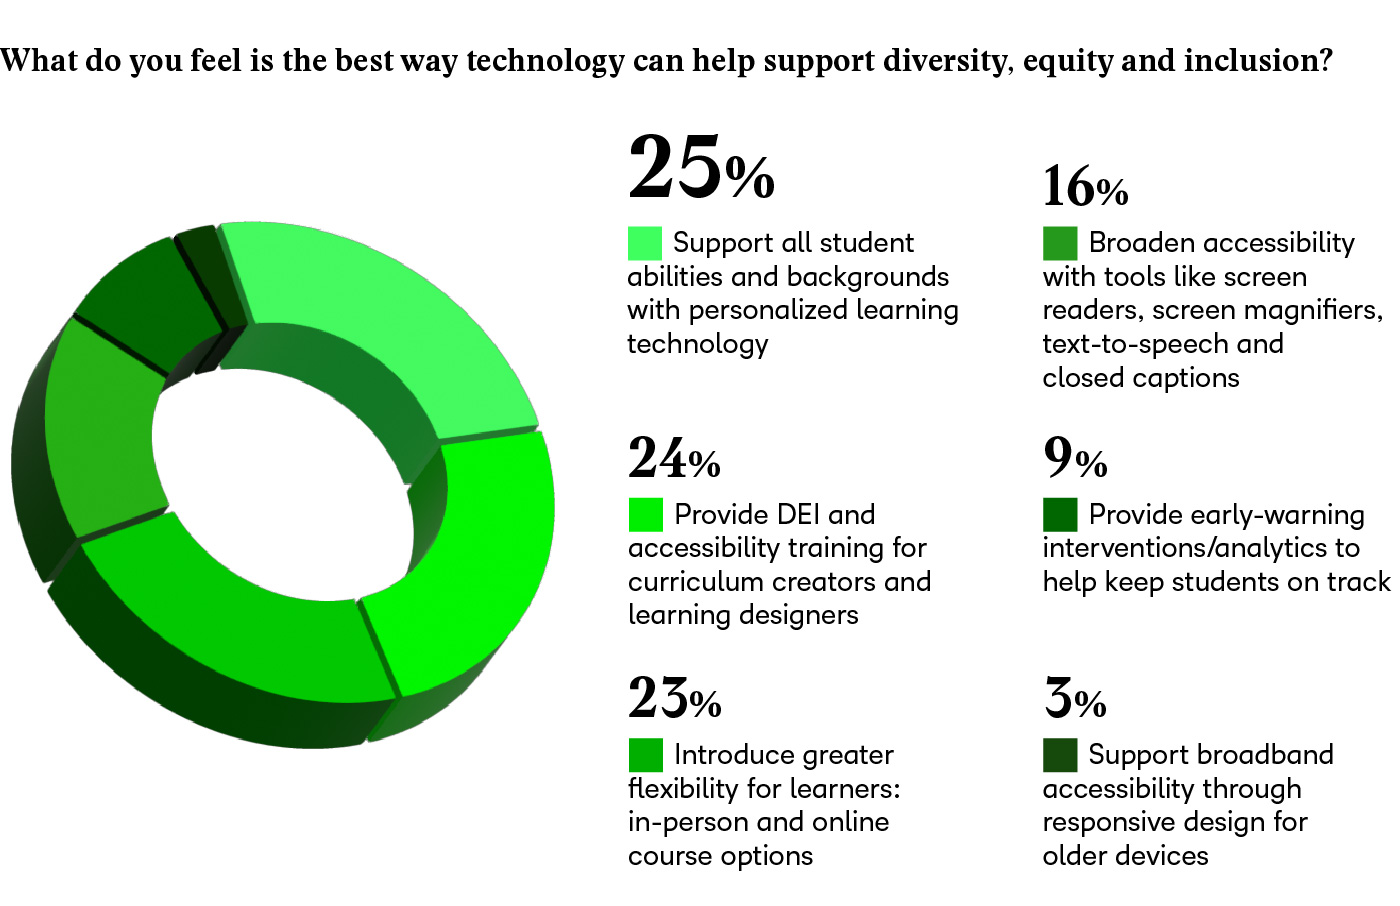 A graphic showing the results of a survey done during the webinar.